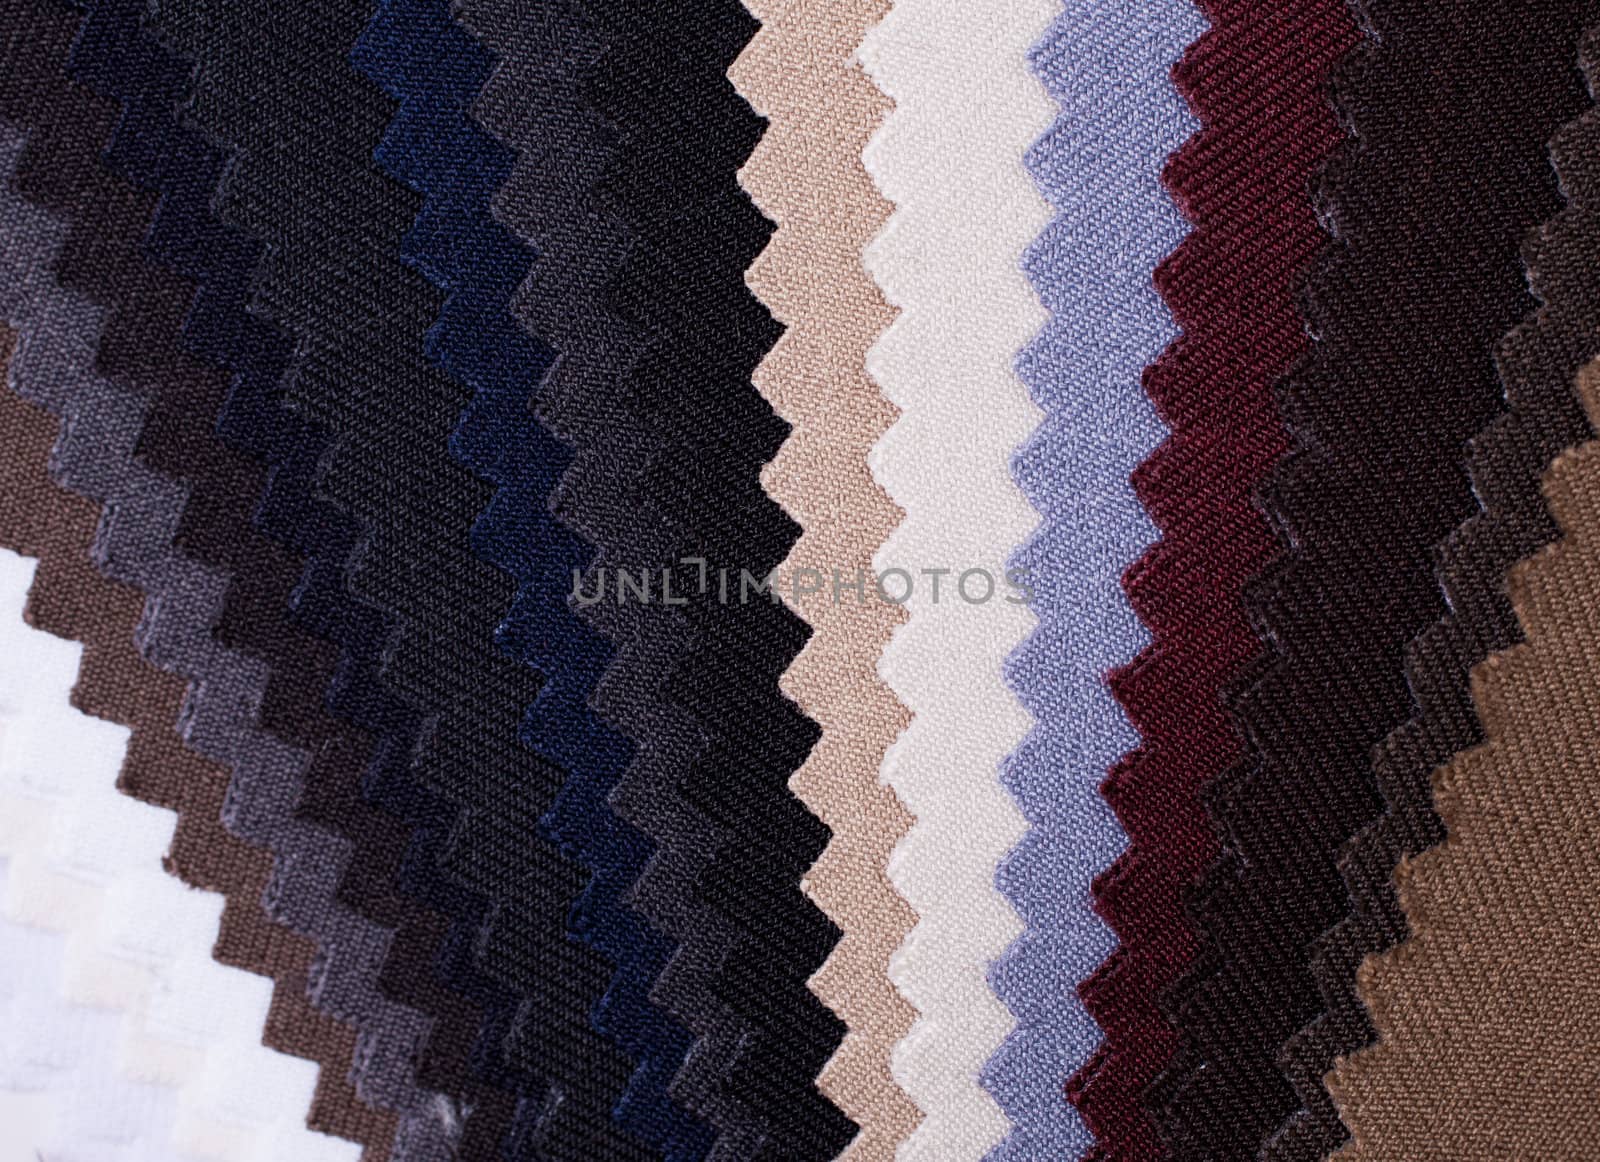 fabric color samples palette  by Suriyaphoto